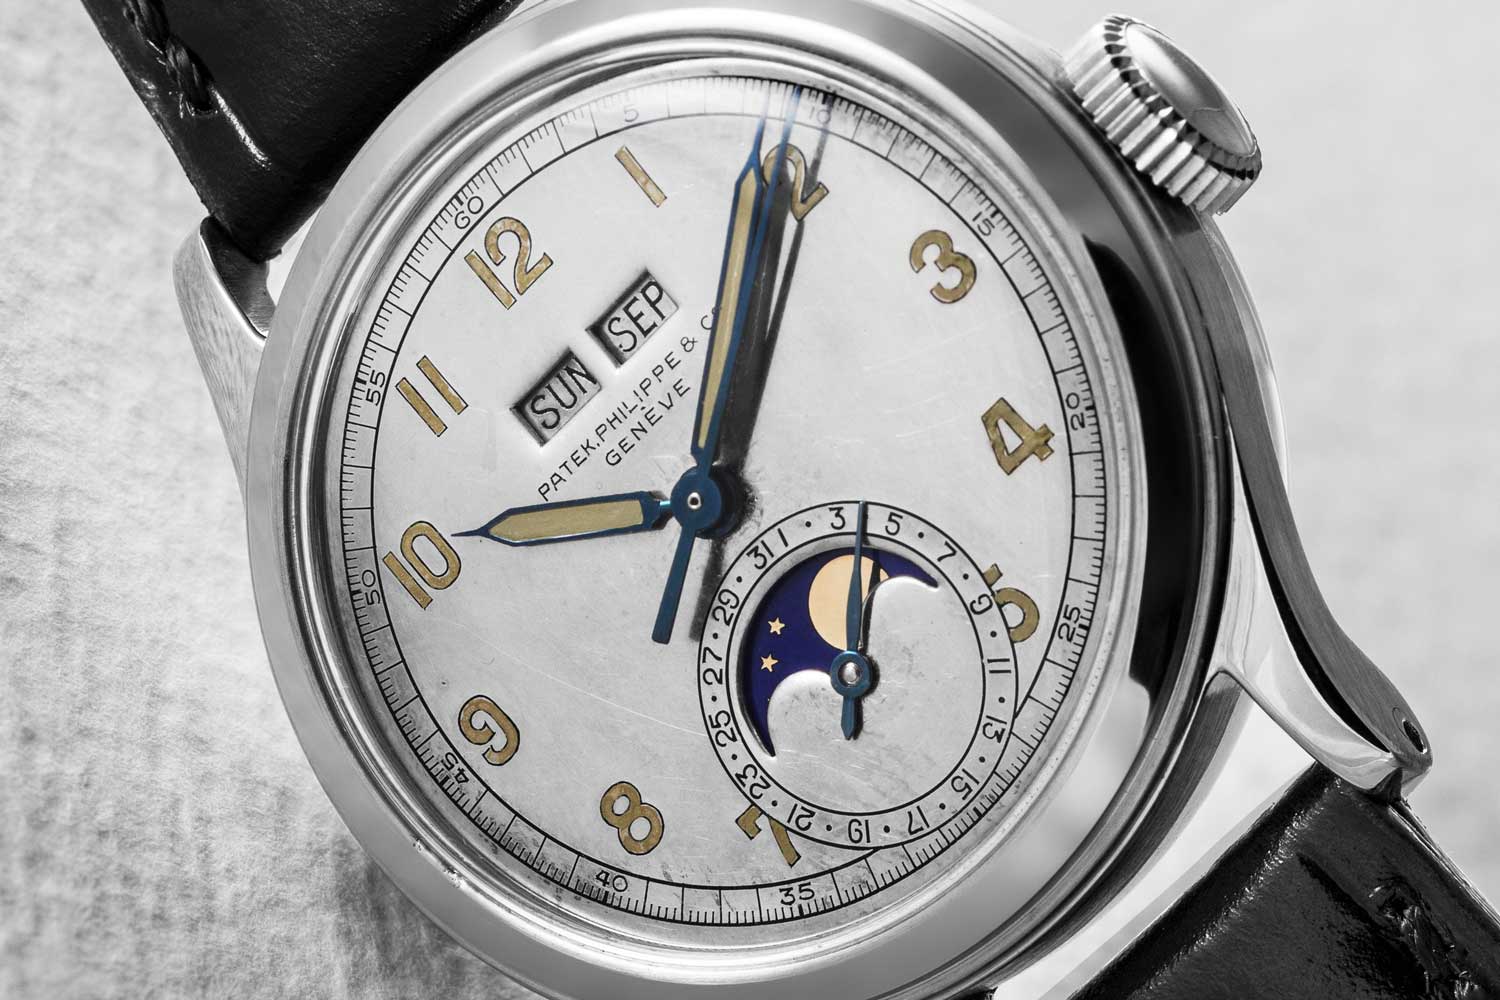 Made by Patek Philippe, a steel pièce unique ref. 1591 water-resistant perpetual calendar with luminous Arabic numerals and hands made for an Indian maharaja in the 1940s (©Revolution)